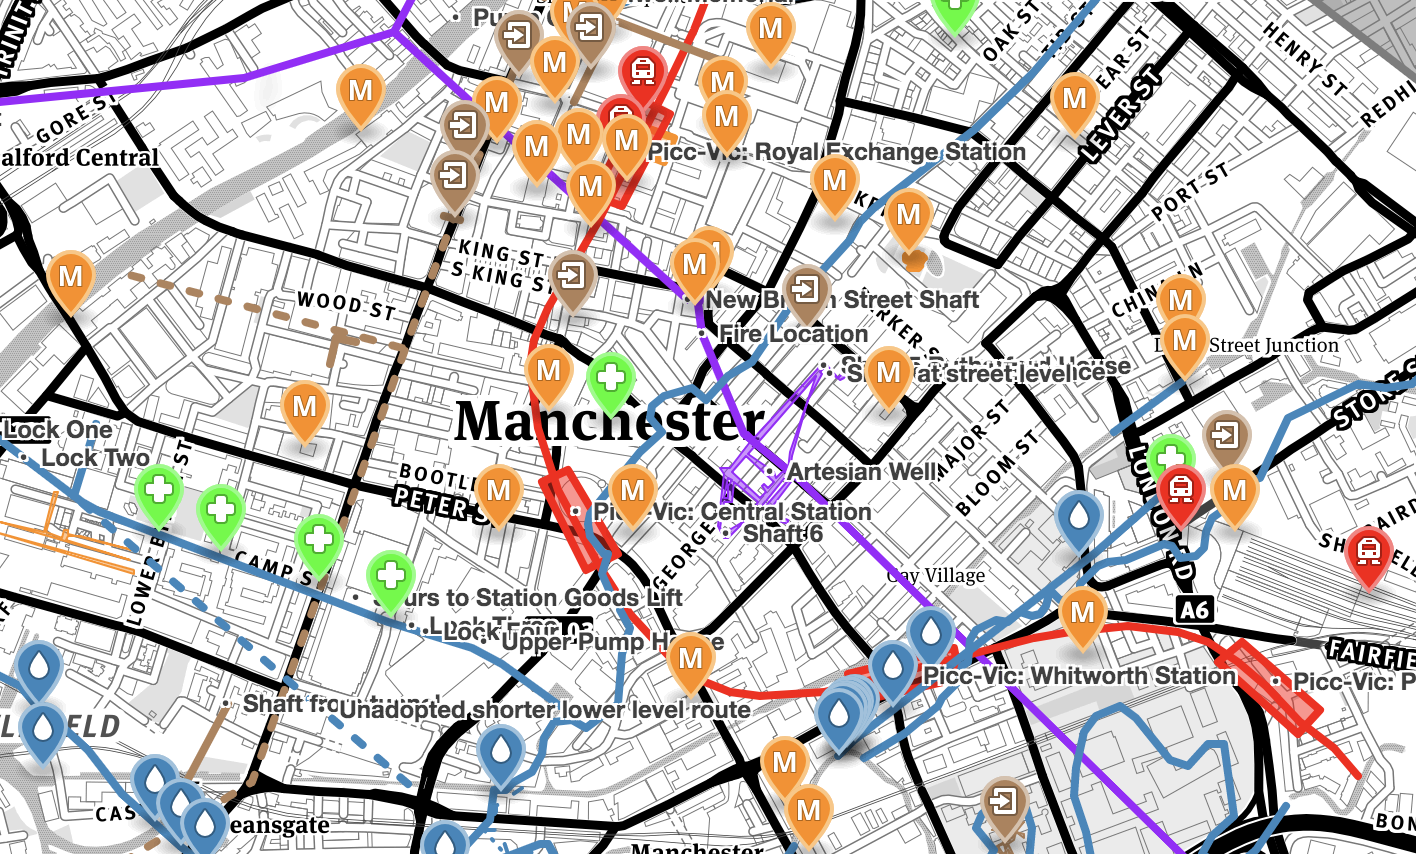 This 'Hidden Manchester' map unveils some of the city’s best kept